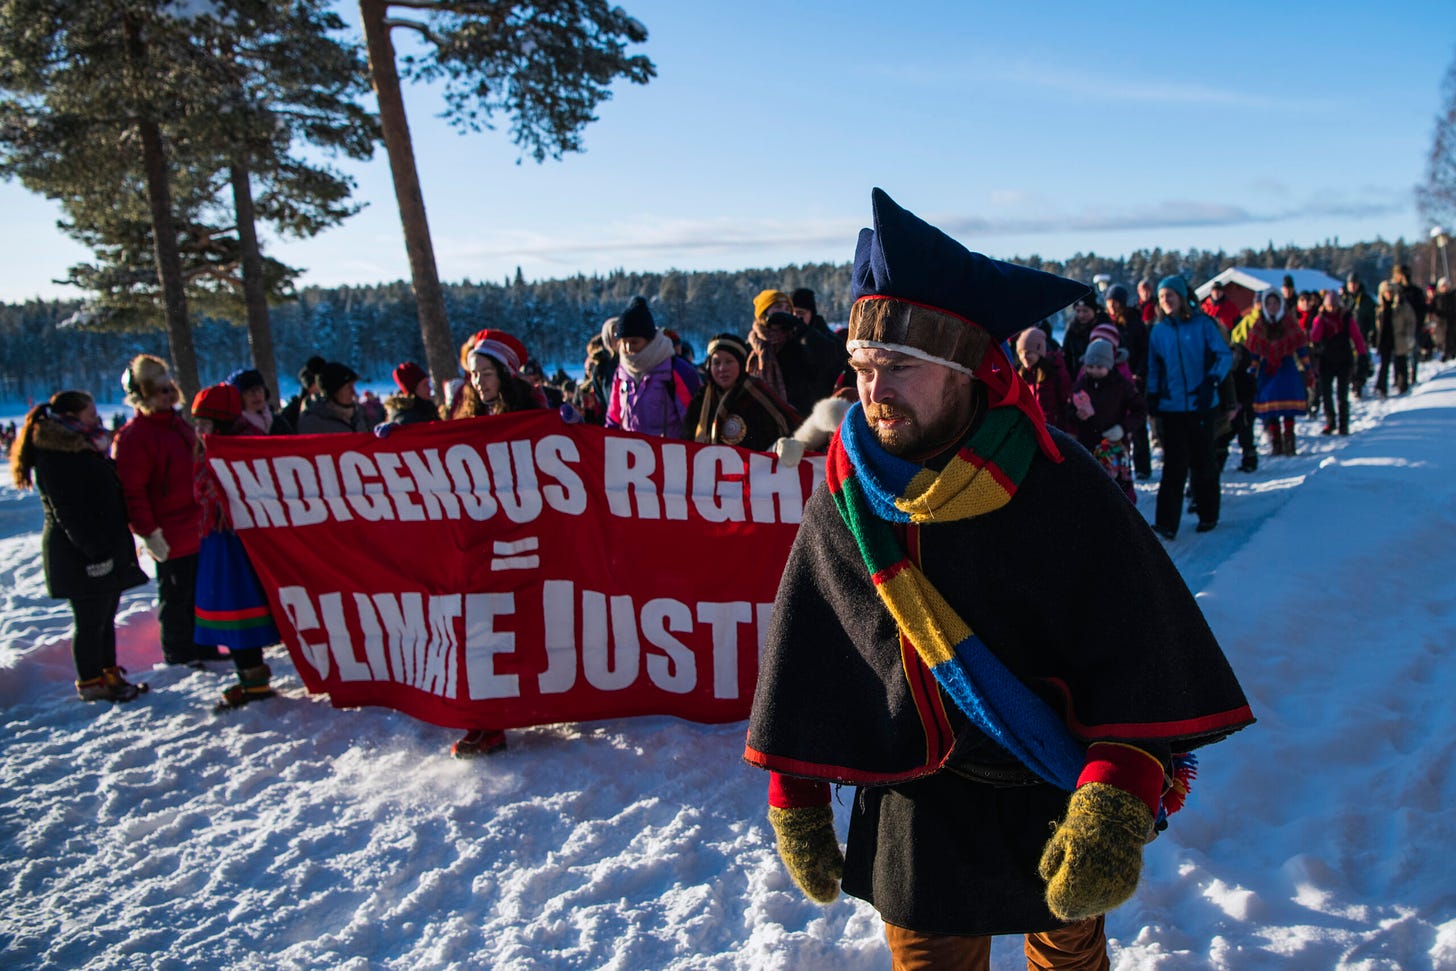 Members of the indigenous Saami community march during a Friday for Future protest in Jokkmokk, northern Sweden on Feb. 7, 2020. Credit: Jonathan Nackstrand/AFP via Getty Images